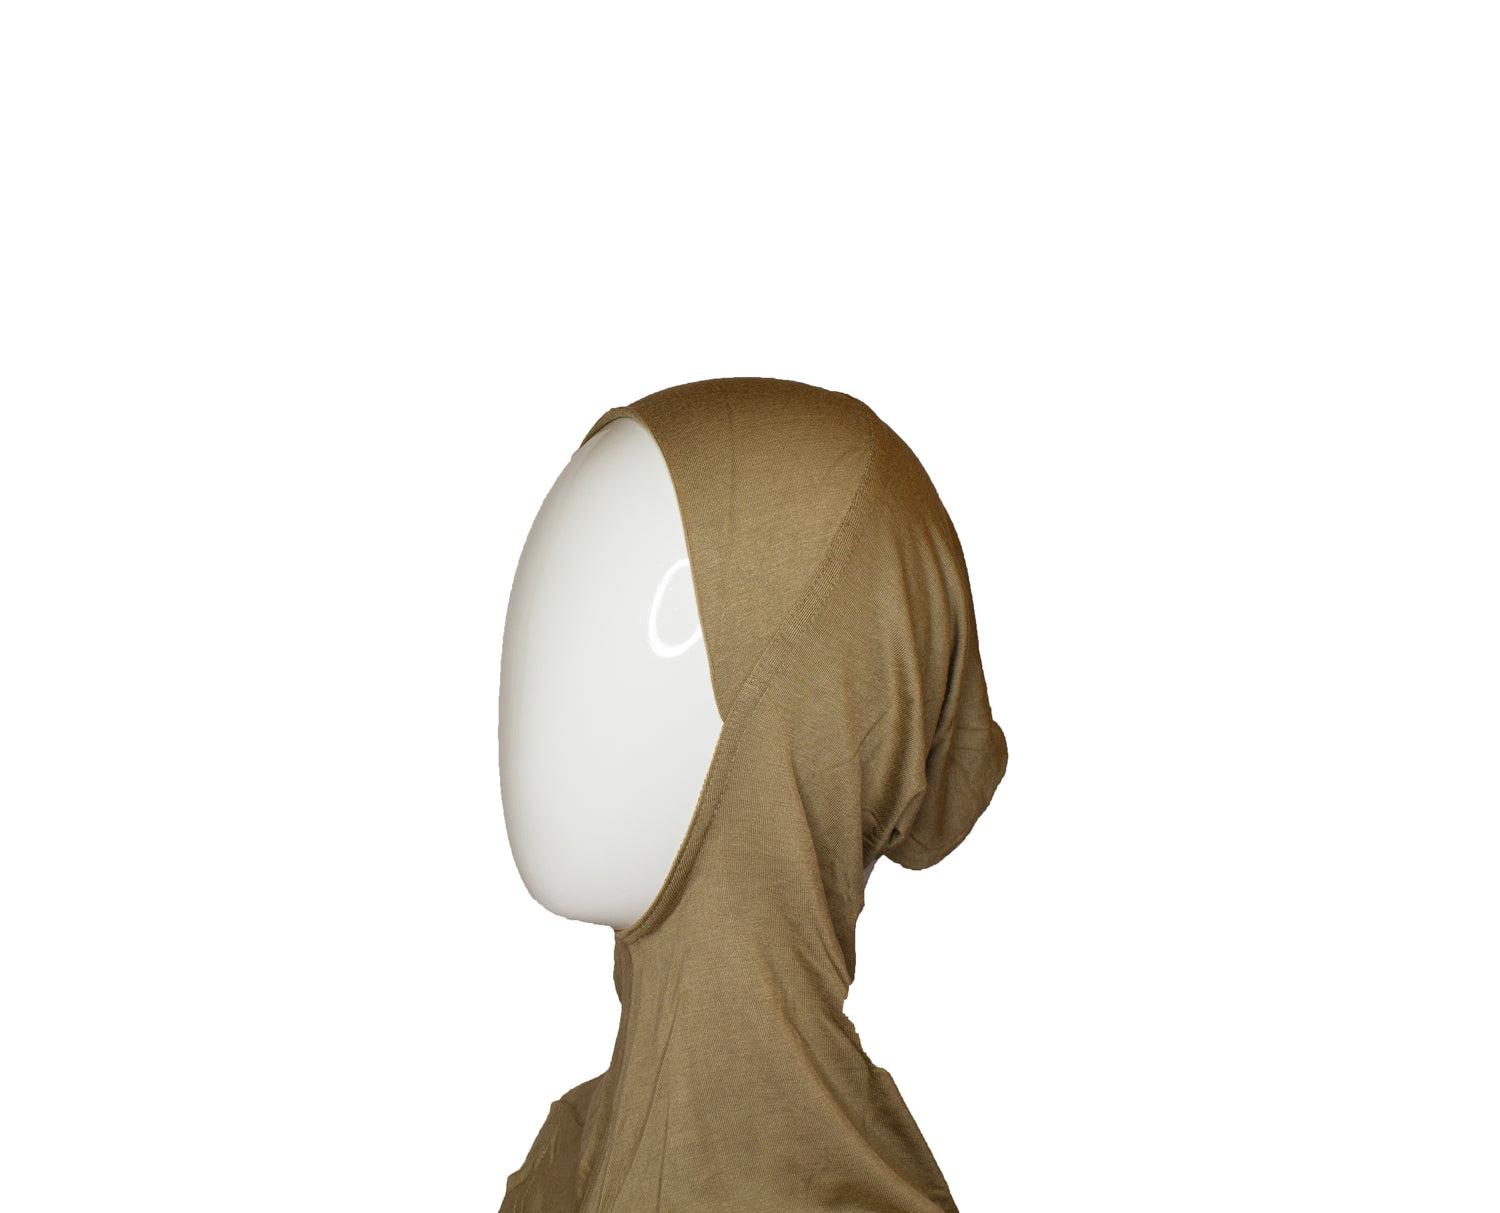 light brown ninja underscarf worn under the hijab to cover the hair and neck